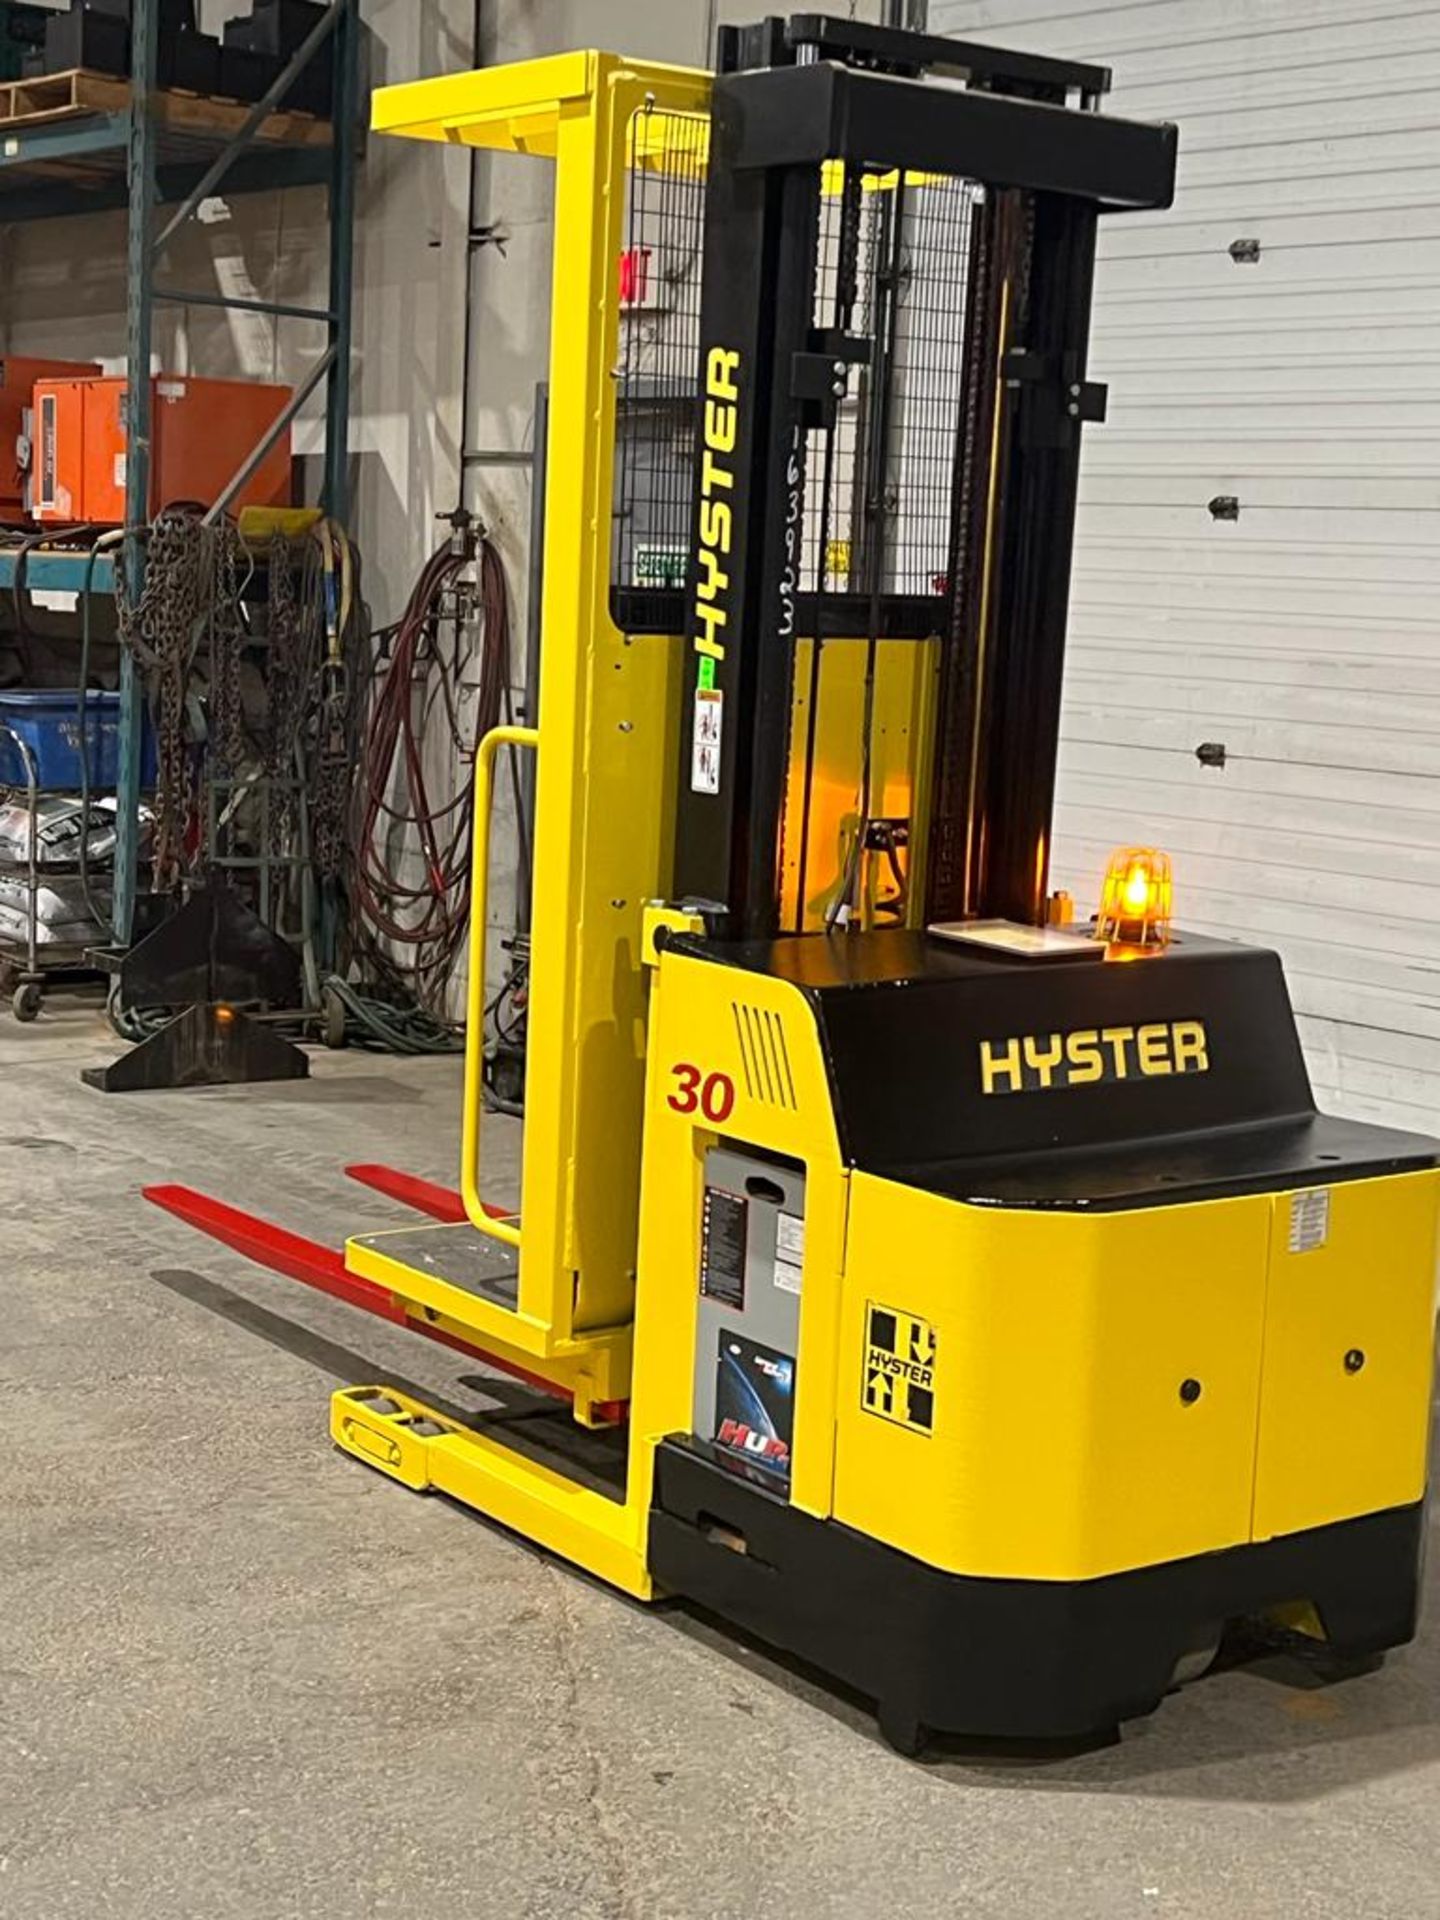 2015 Hyster Order Picker 3000lbs capacity electric Powered Pallet Cart 24V battery - FREE CUSTOMS - Image 5 of 5